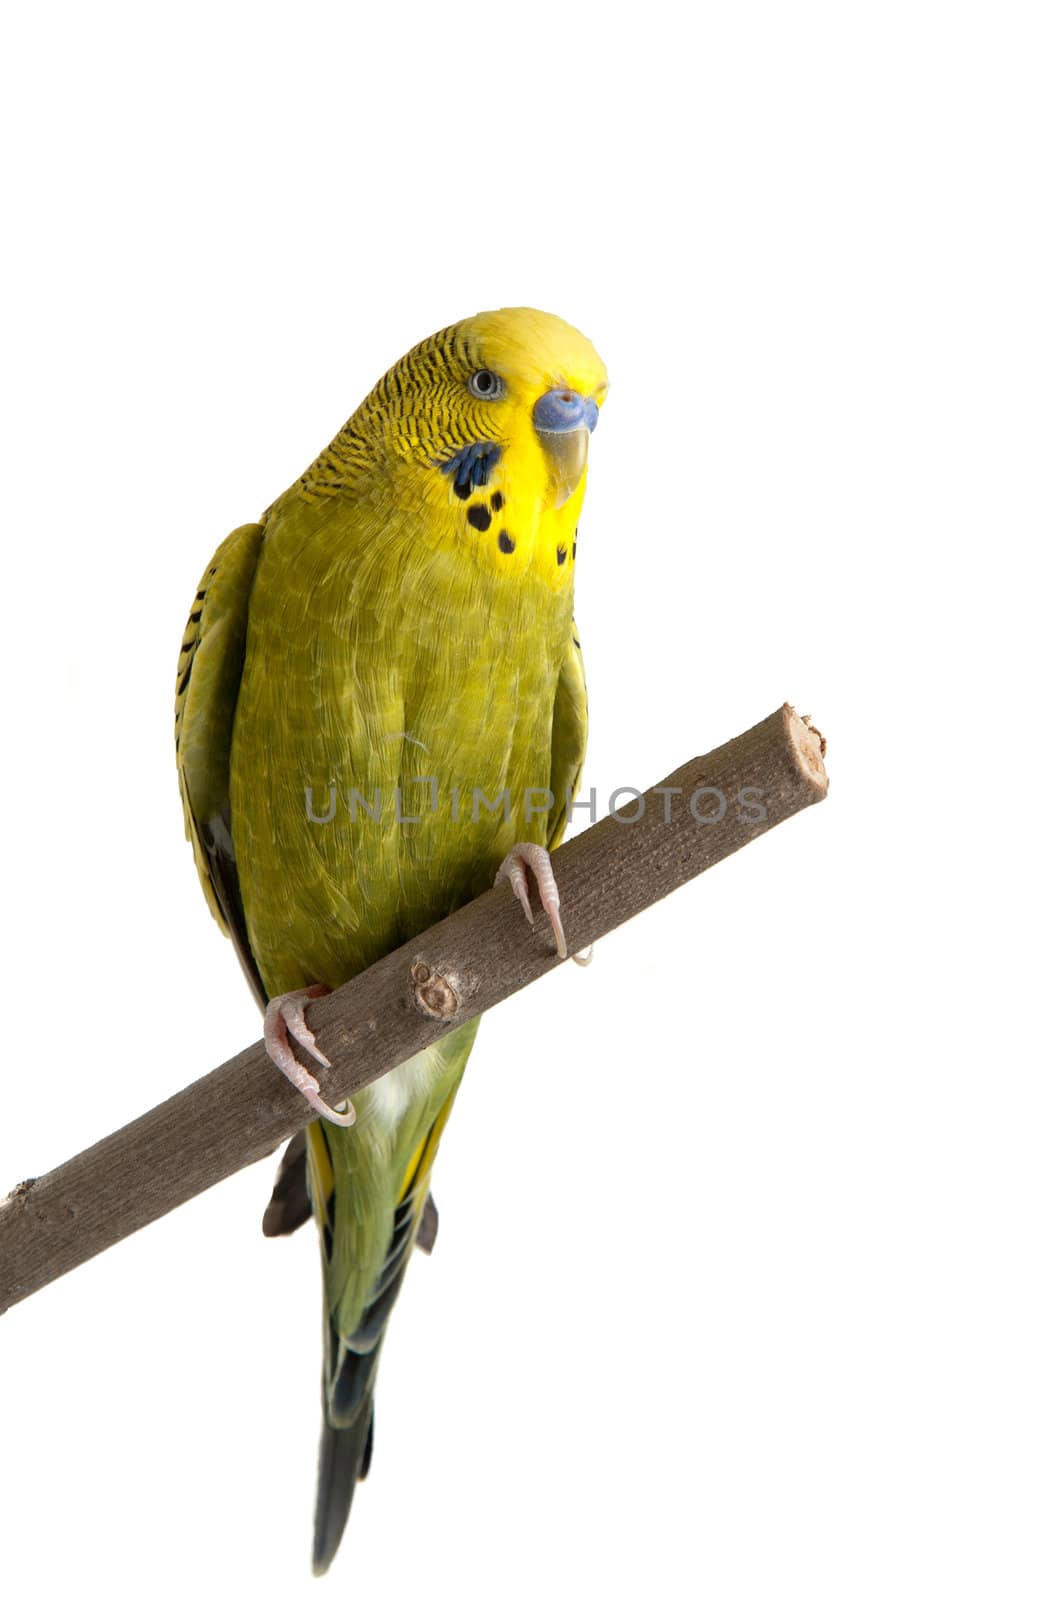 A green tame green budgie sitting on a branch